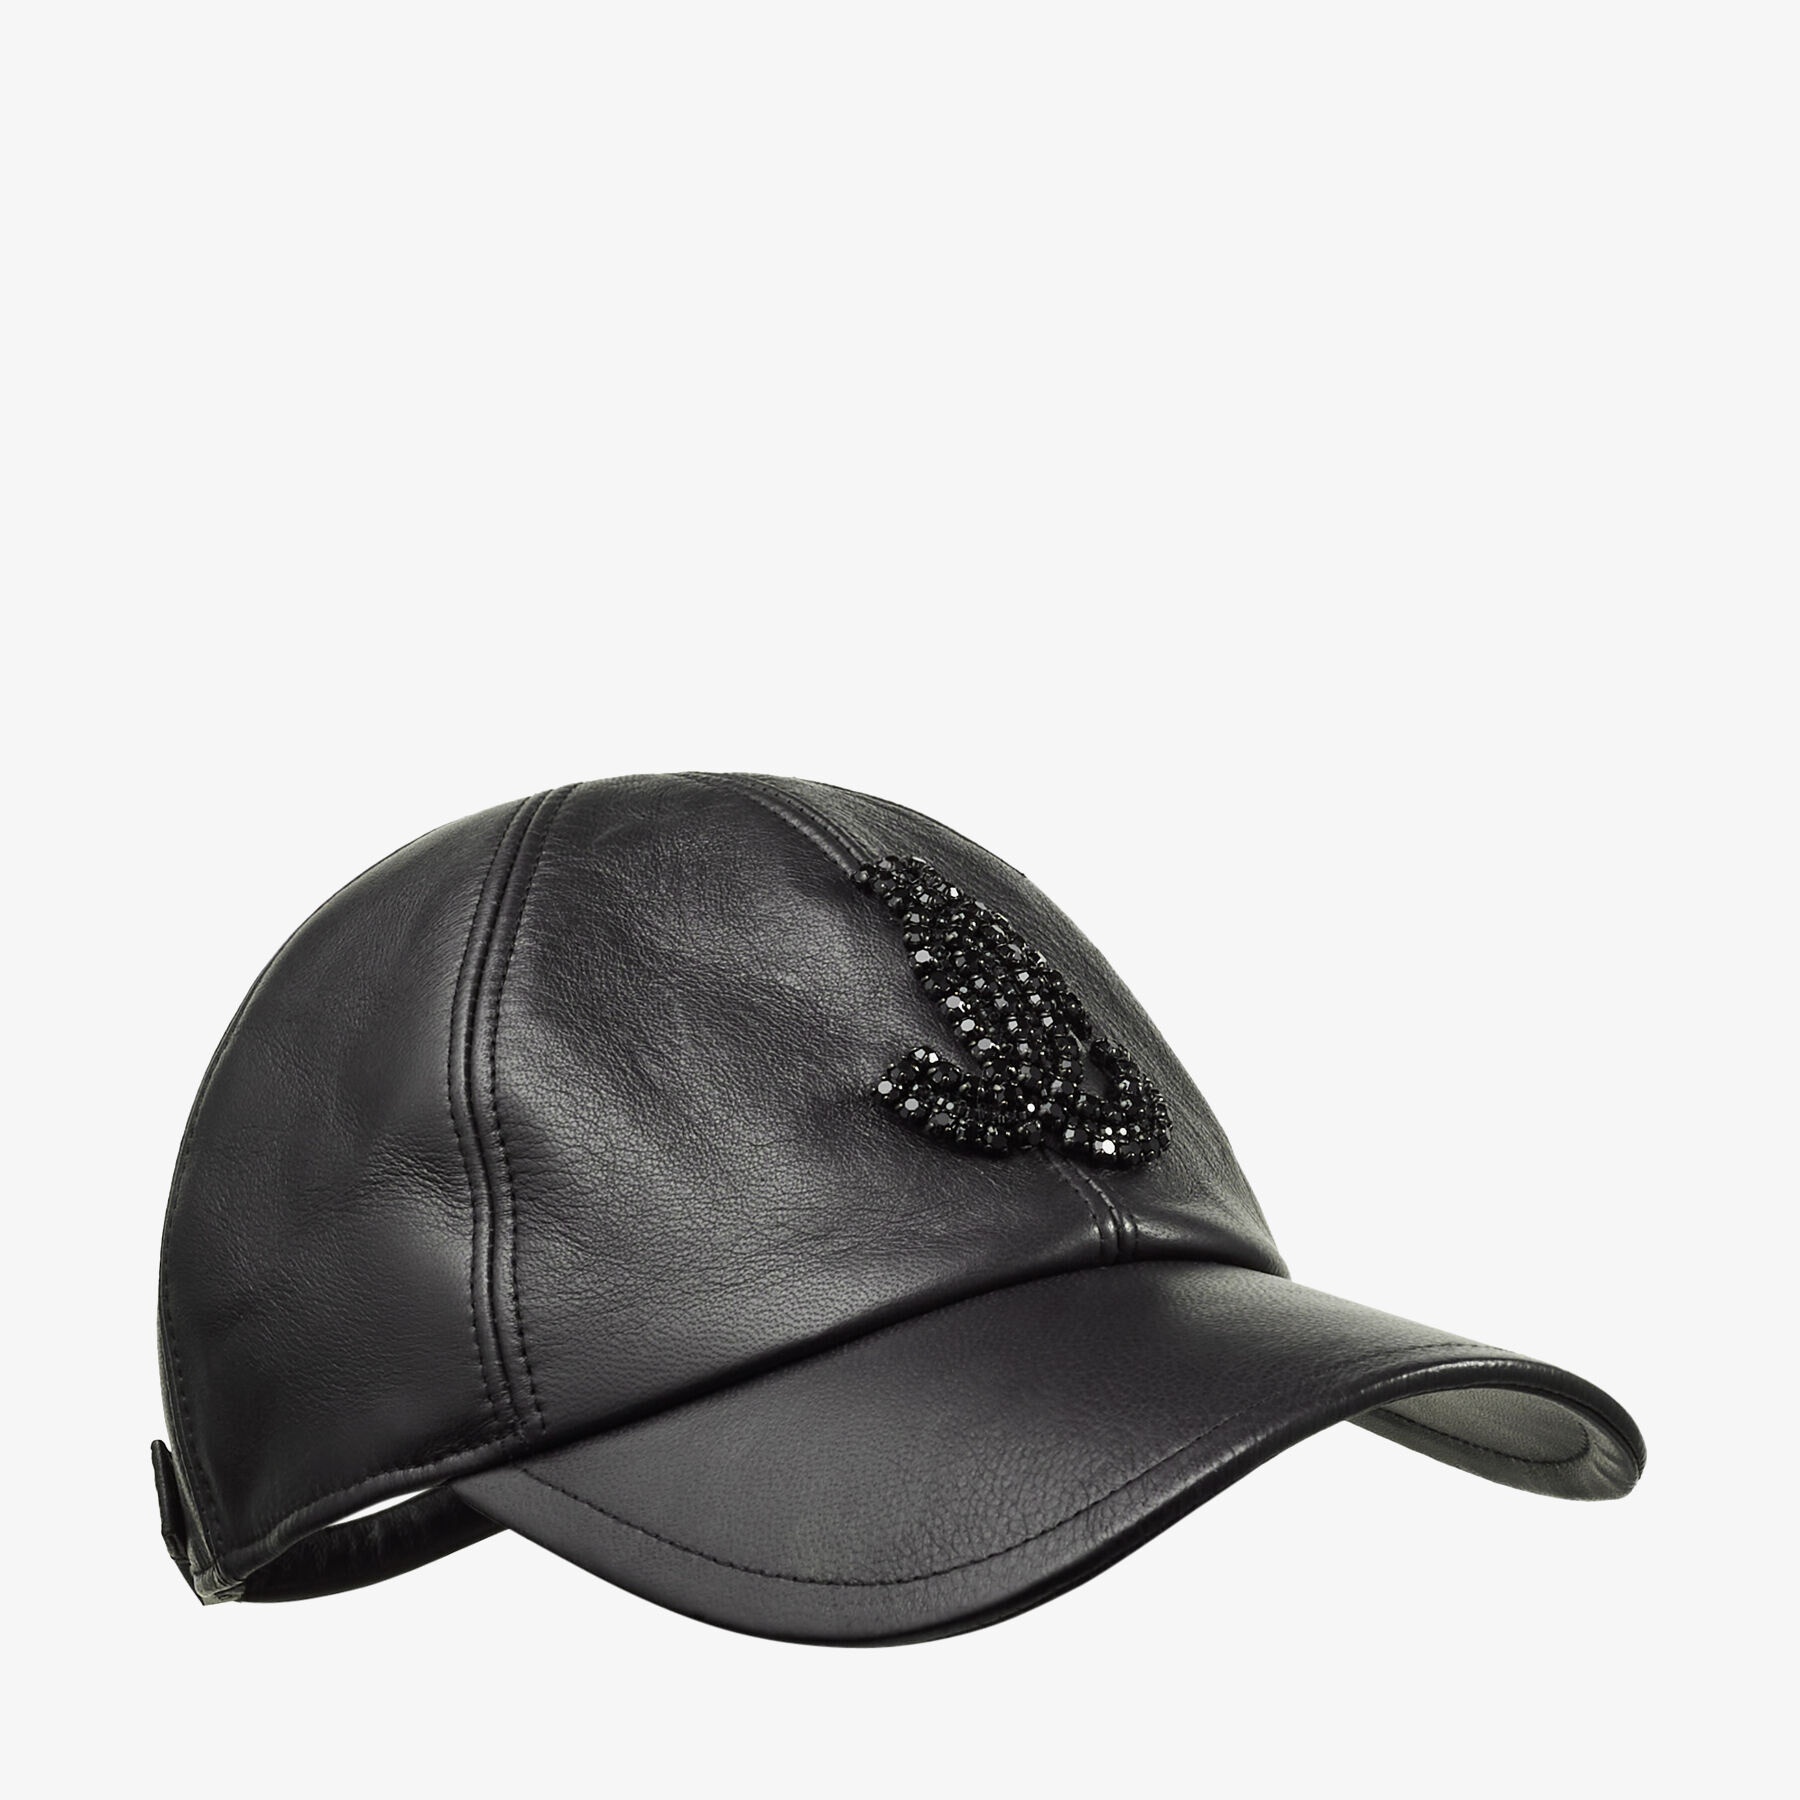 Saby
Black Leather Baseball Cap with Crystal JC Logo - 2